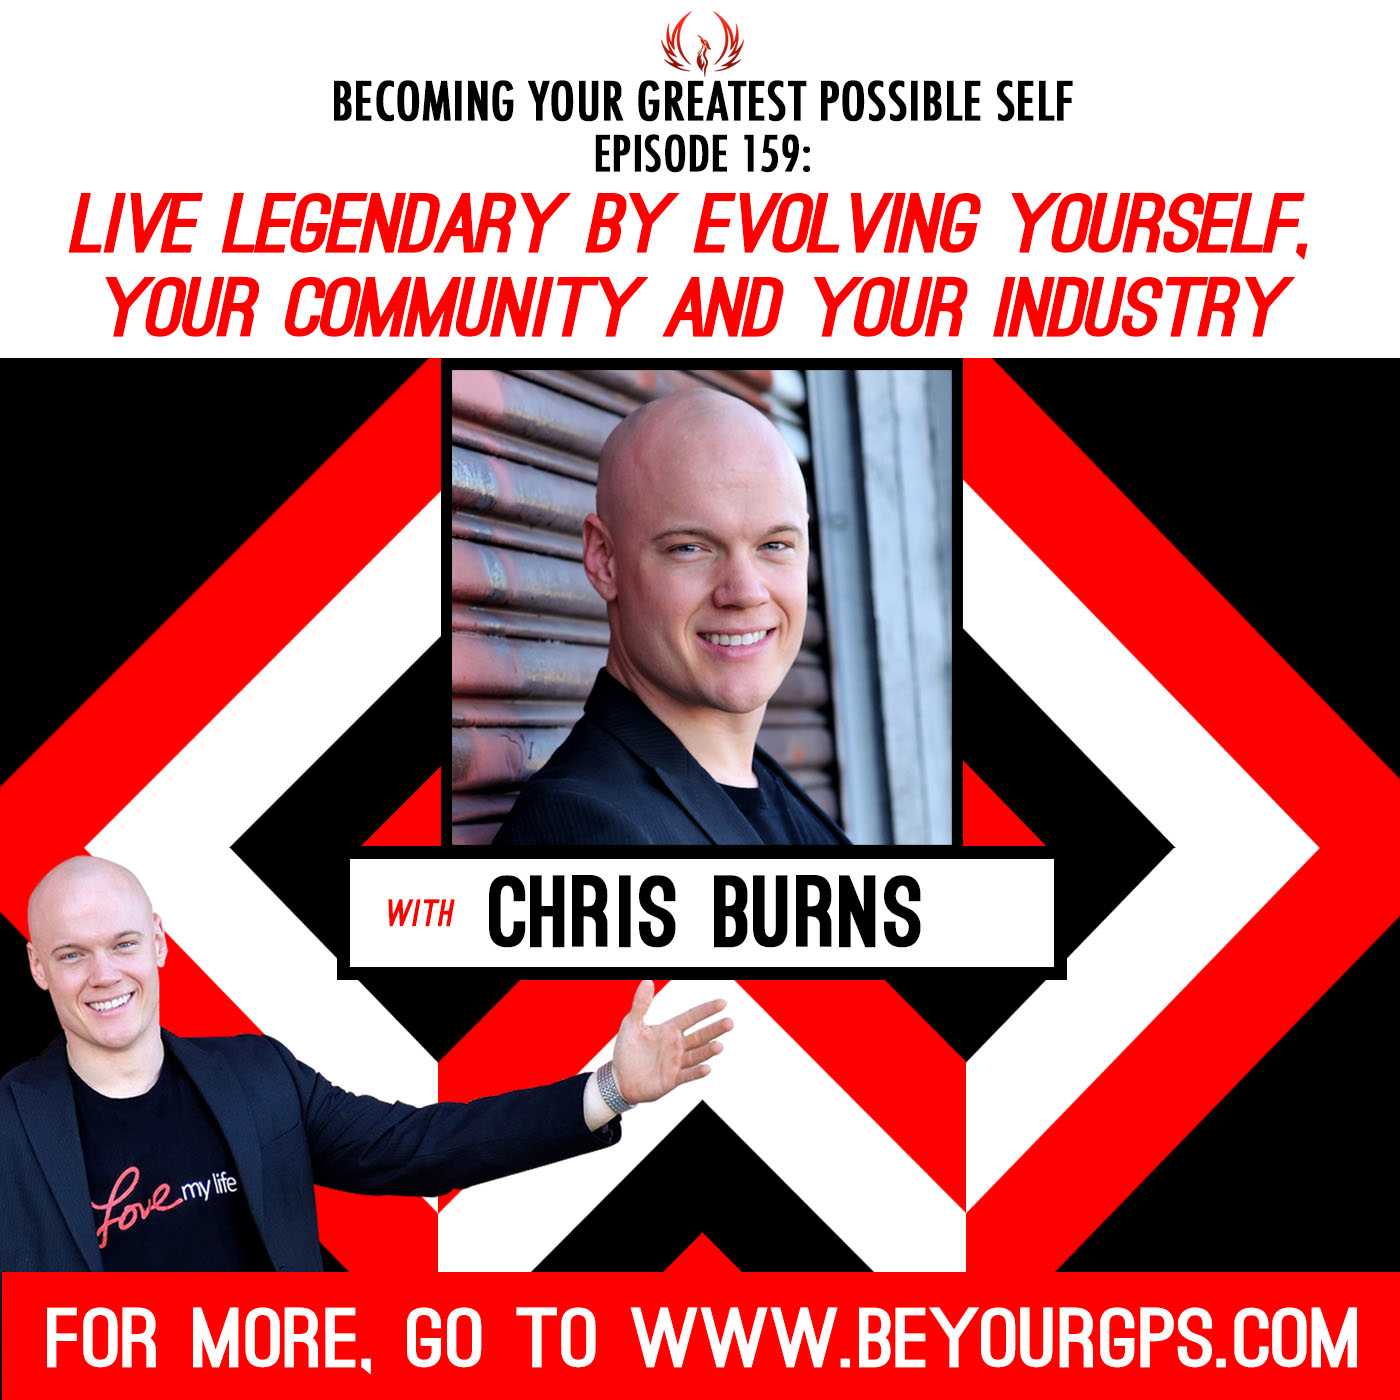 Live LEGENDARY by Evolving Yourself, Your Community and Your Industry with Chris Burns